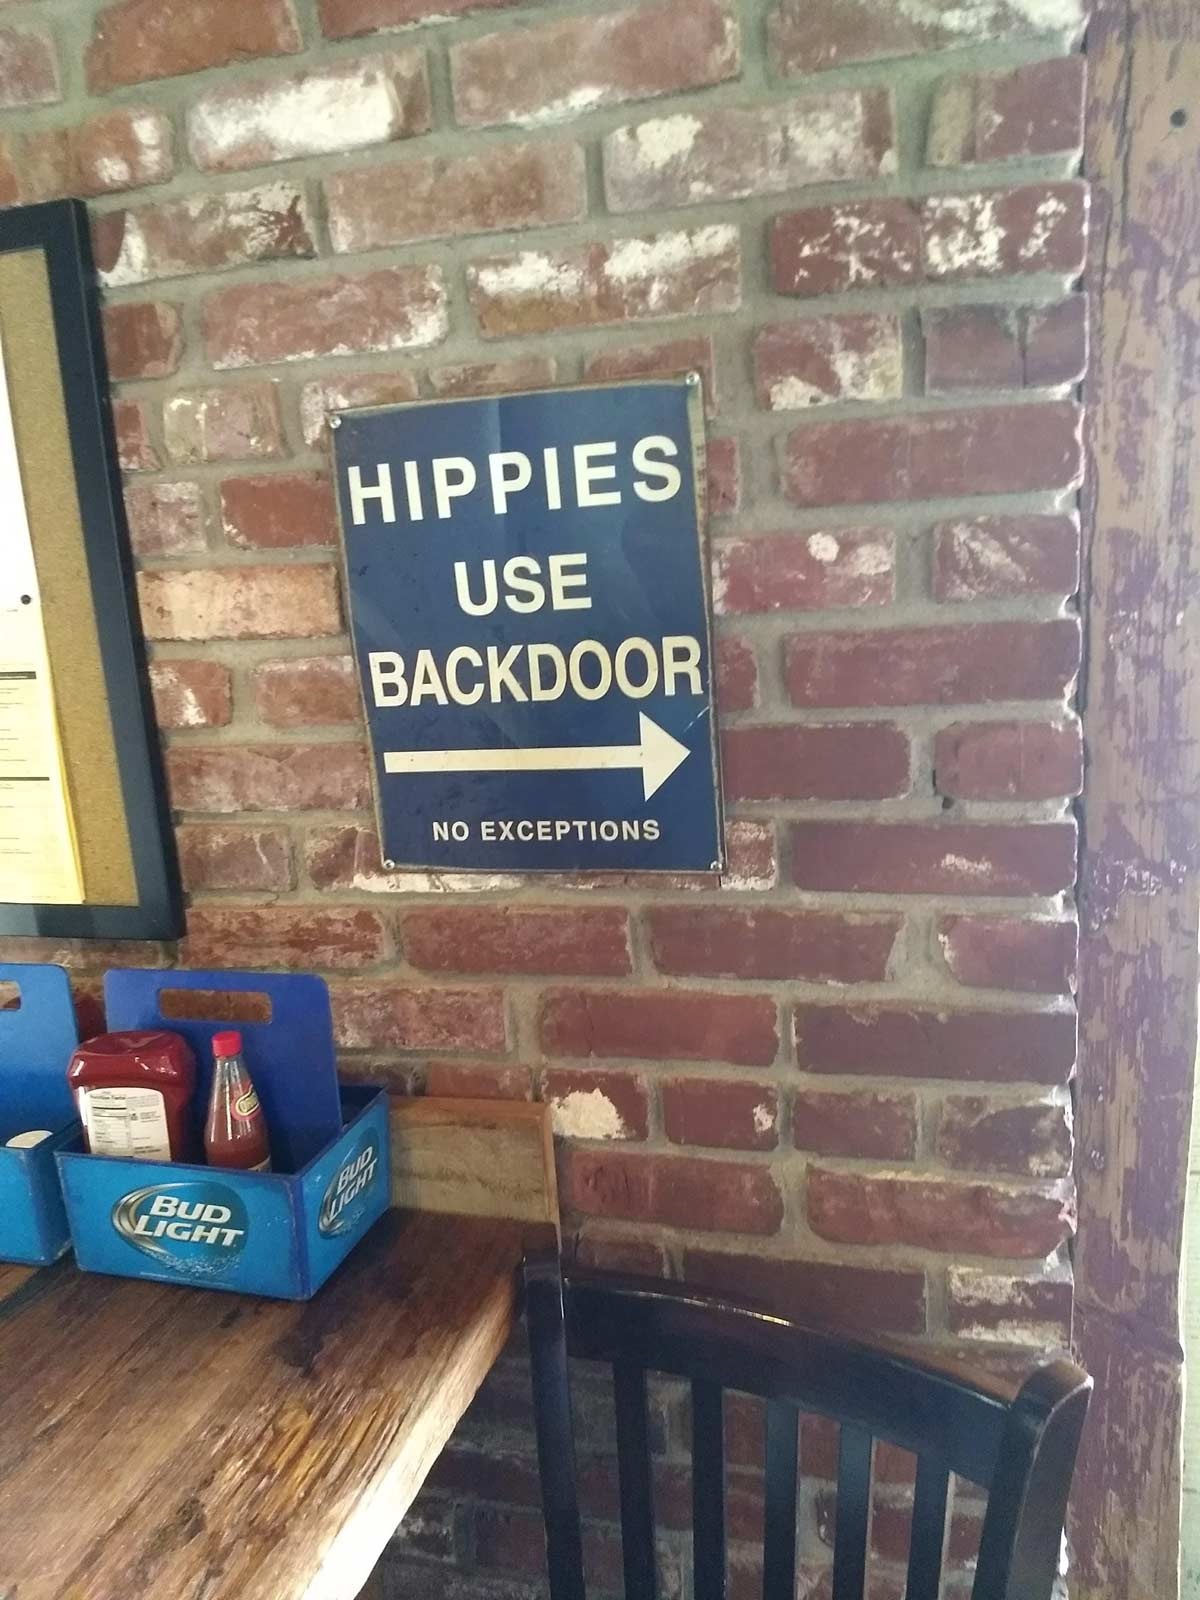 gus's world famous fried chicken - Bud Light Hippies S Use Backdoor No Exceptions